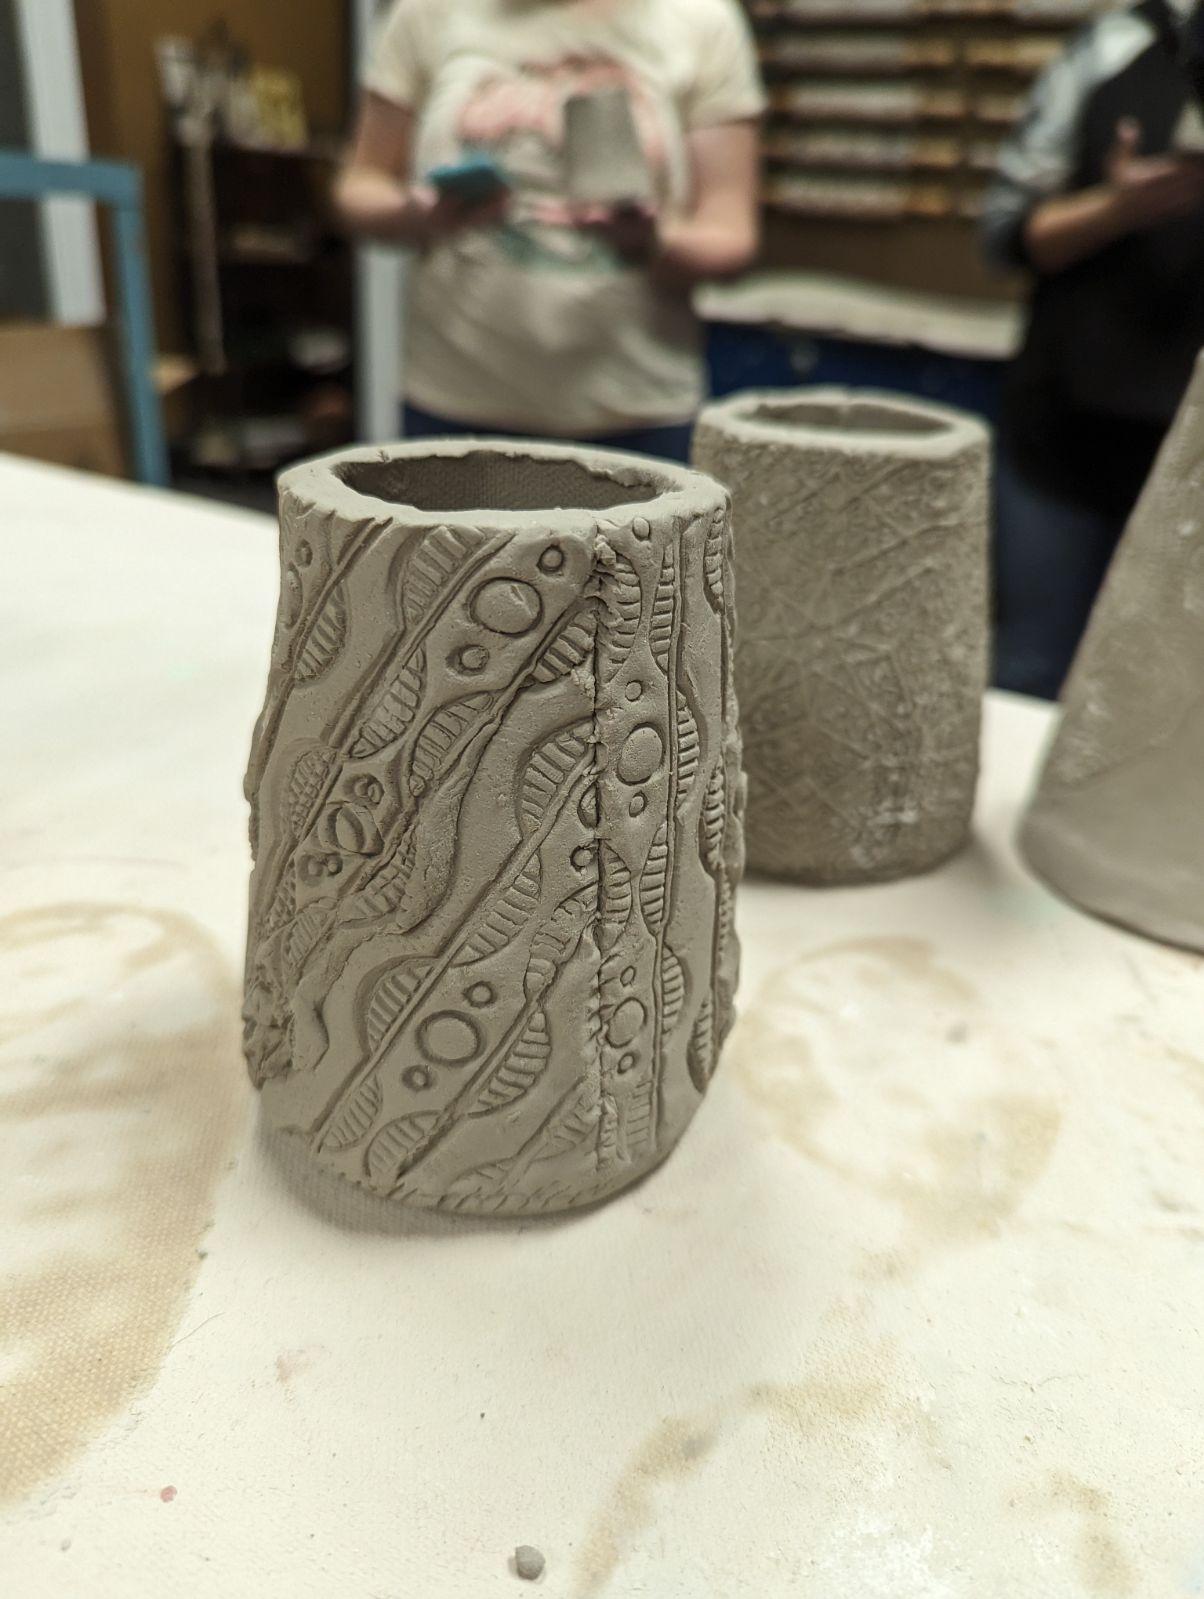 Moscow: Craft Mugs March 21